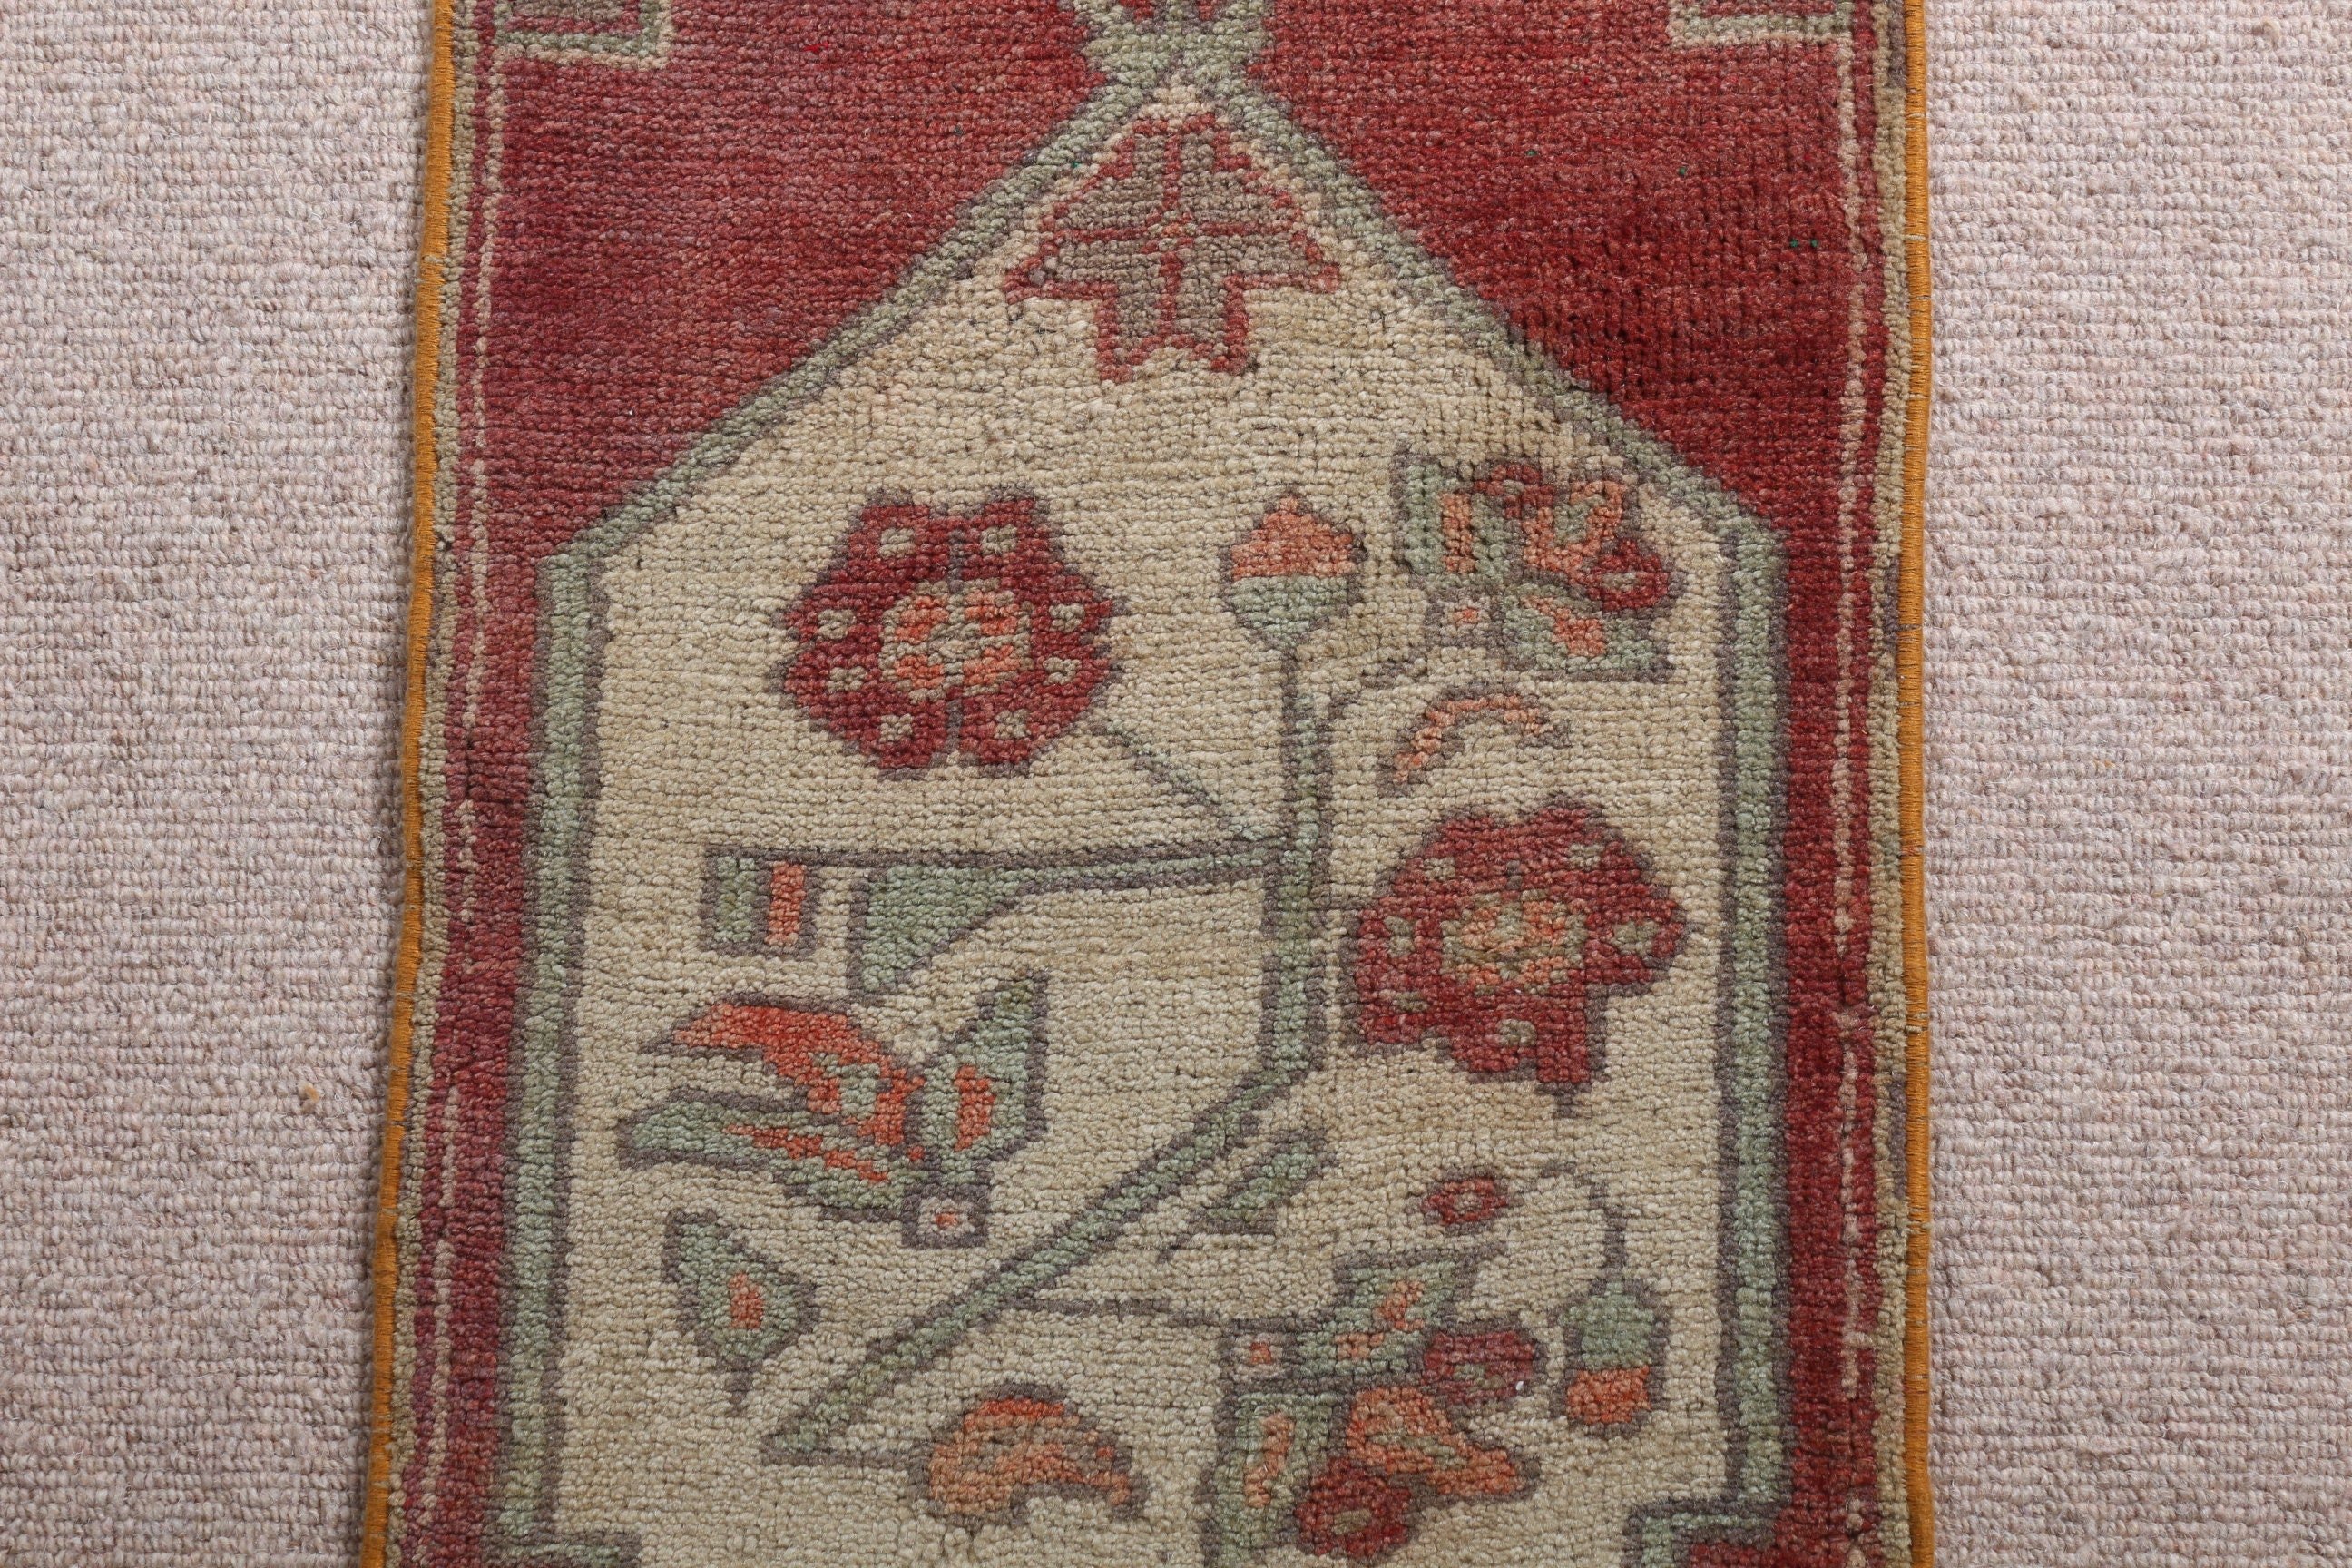 Turkish Rug, Vintage Rugs, Anatolian Rug, Red Oriental Rugs, Home Decor Rugs, Kitchen Rug, 1.2x2.3 ft Small Rug, Old Rug, Wall Hanging Rugs